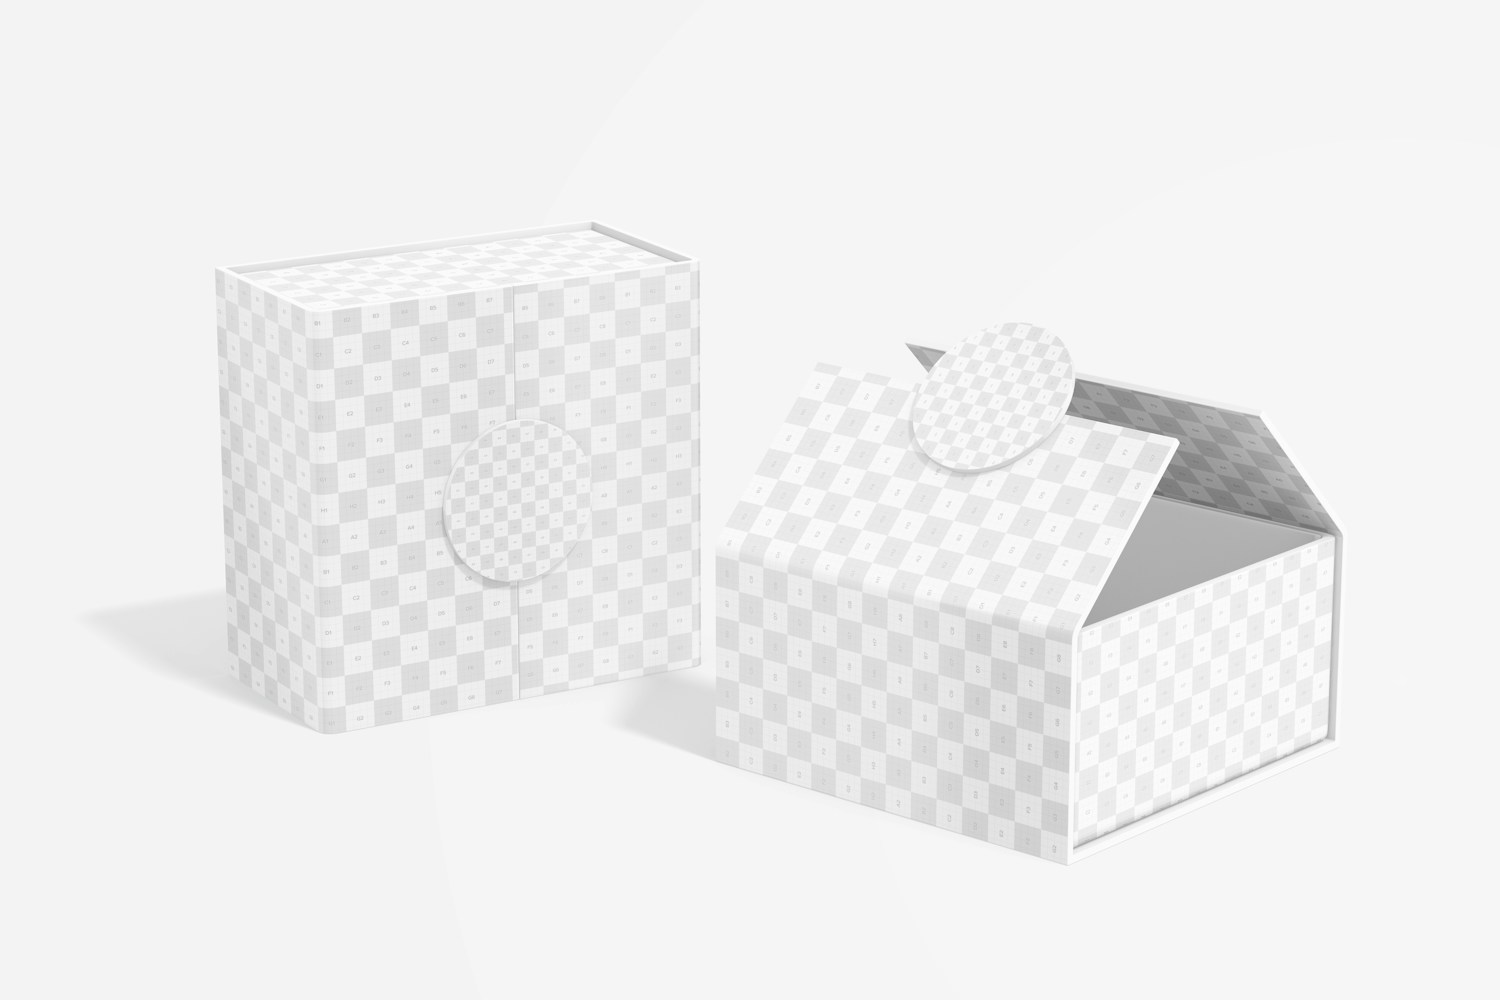 Middle Open Box Mockup, Opened and Closed